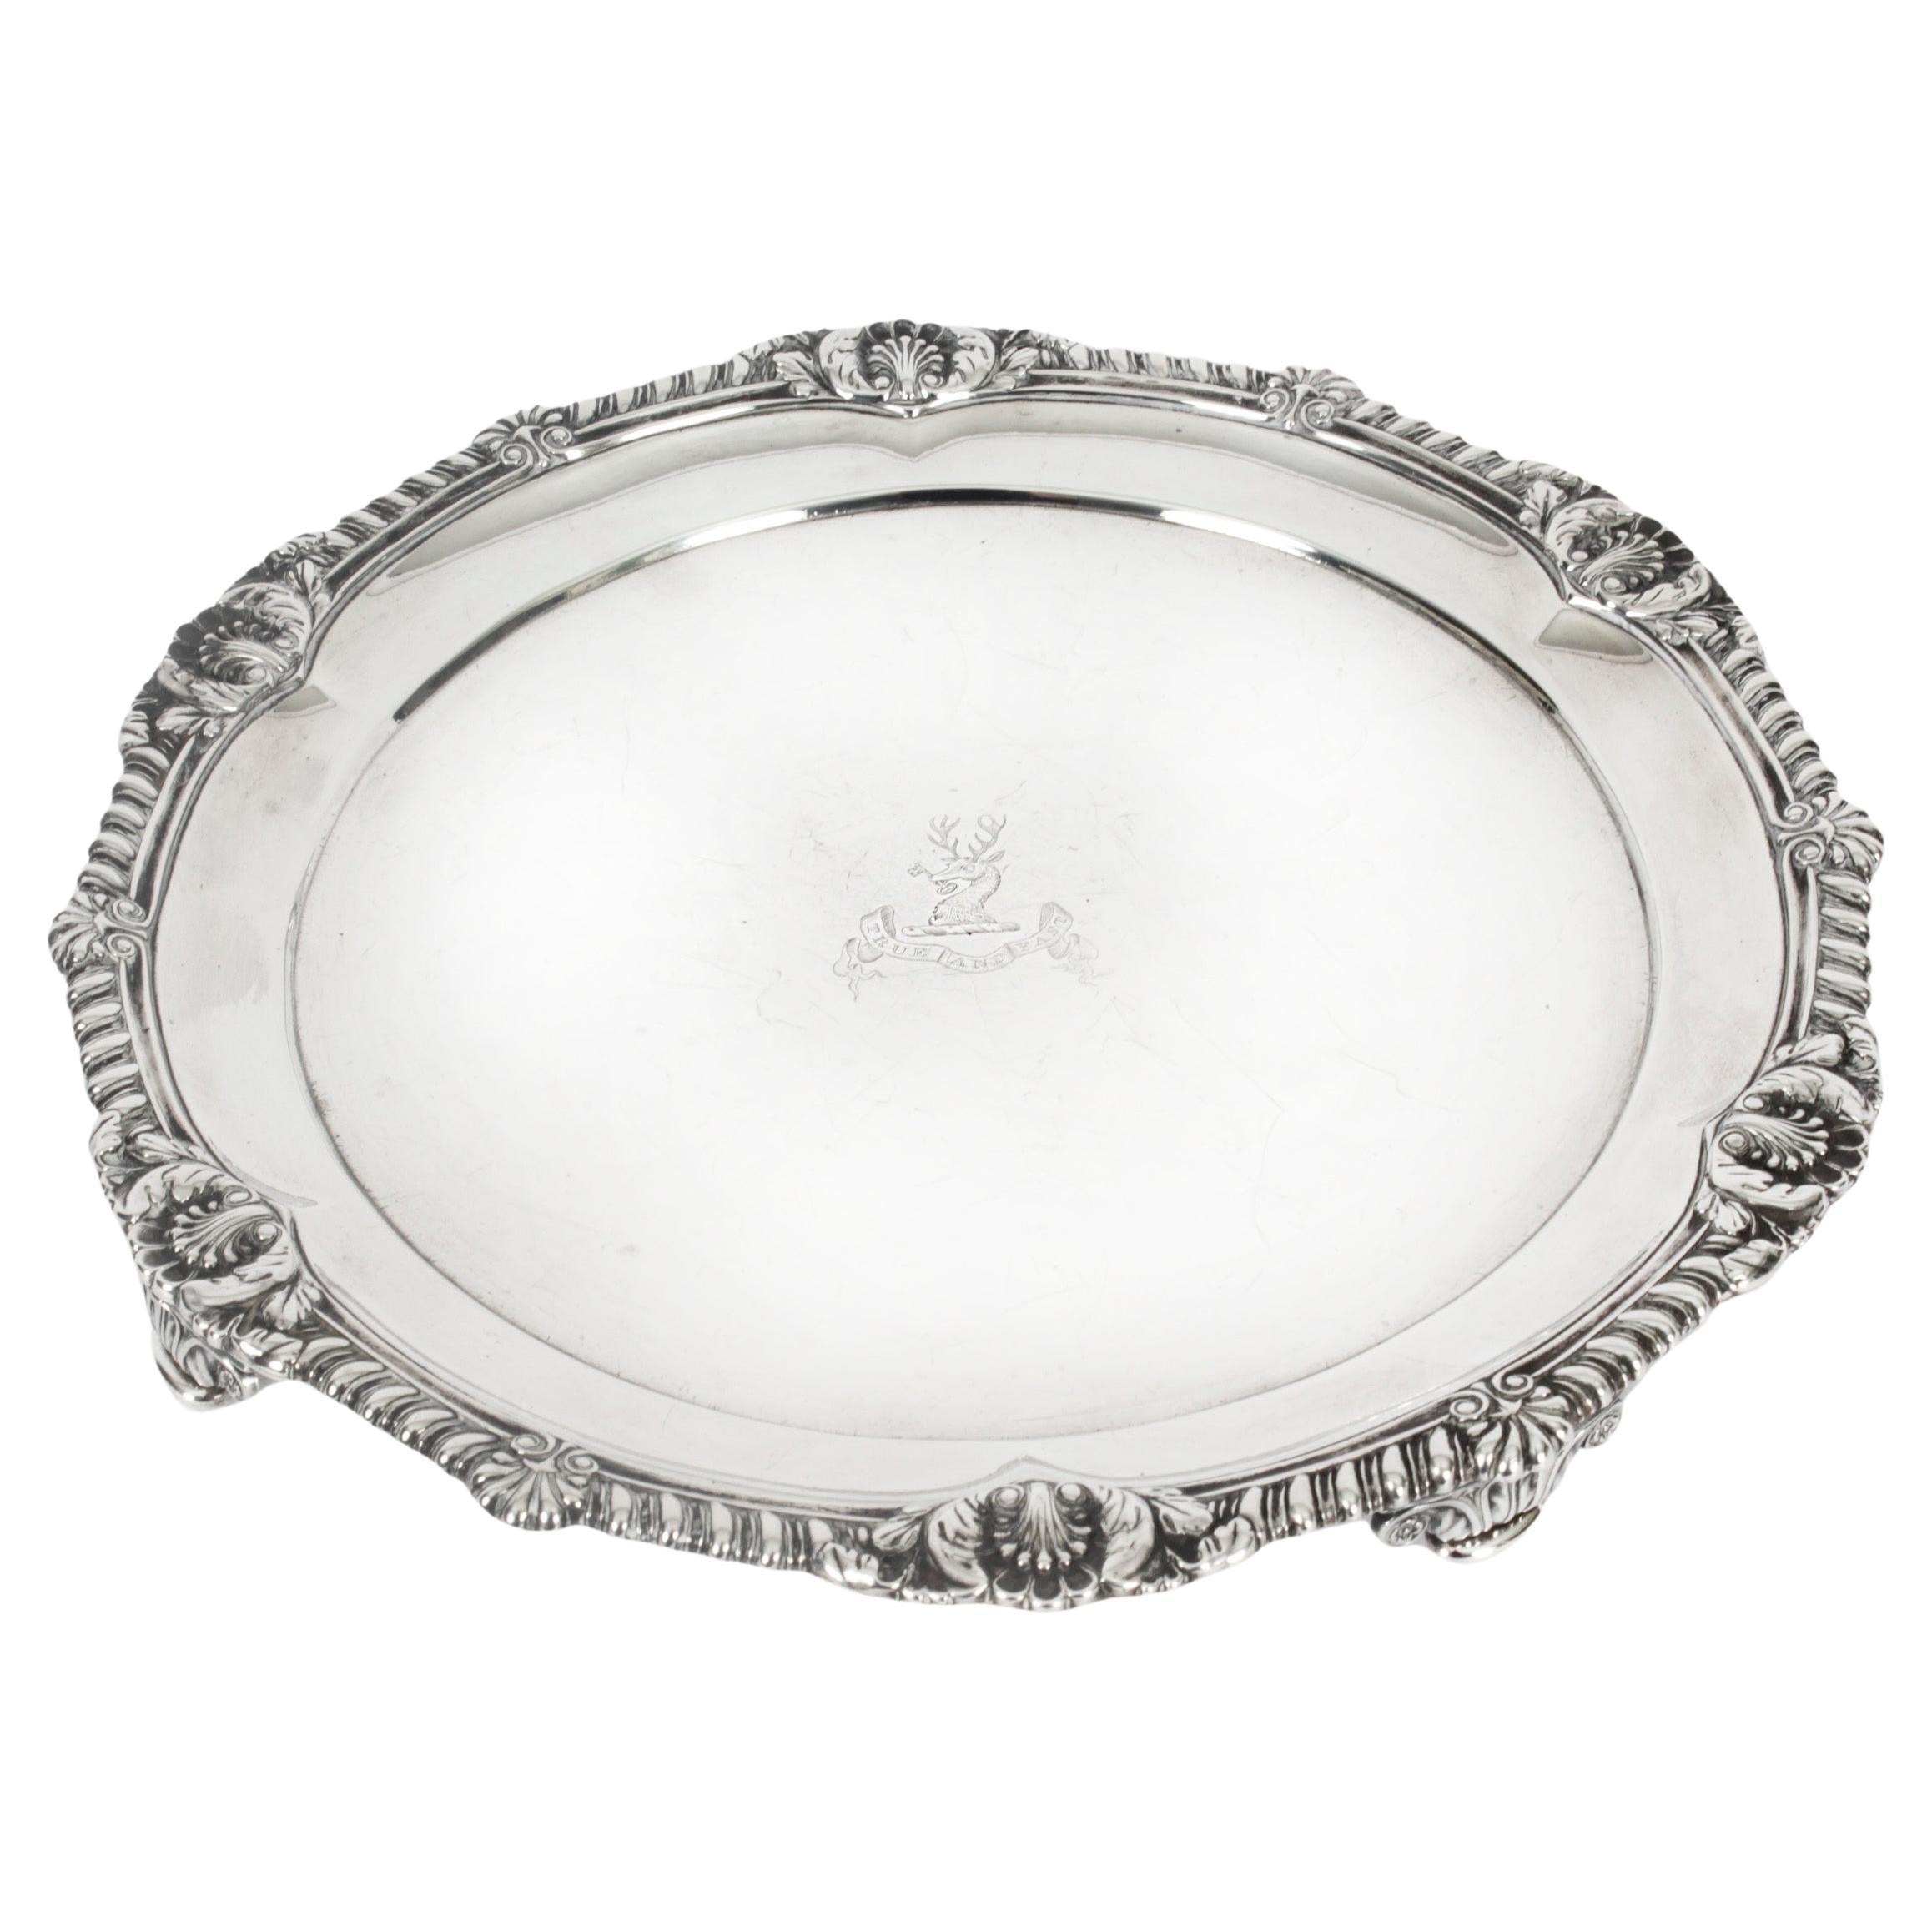 Antique George III Sterling Silver Salver by Paul Storr 1811 19th Century